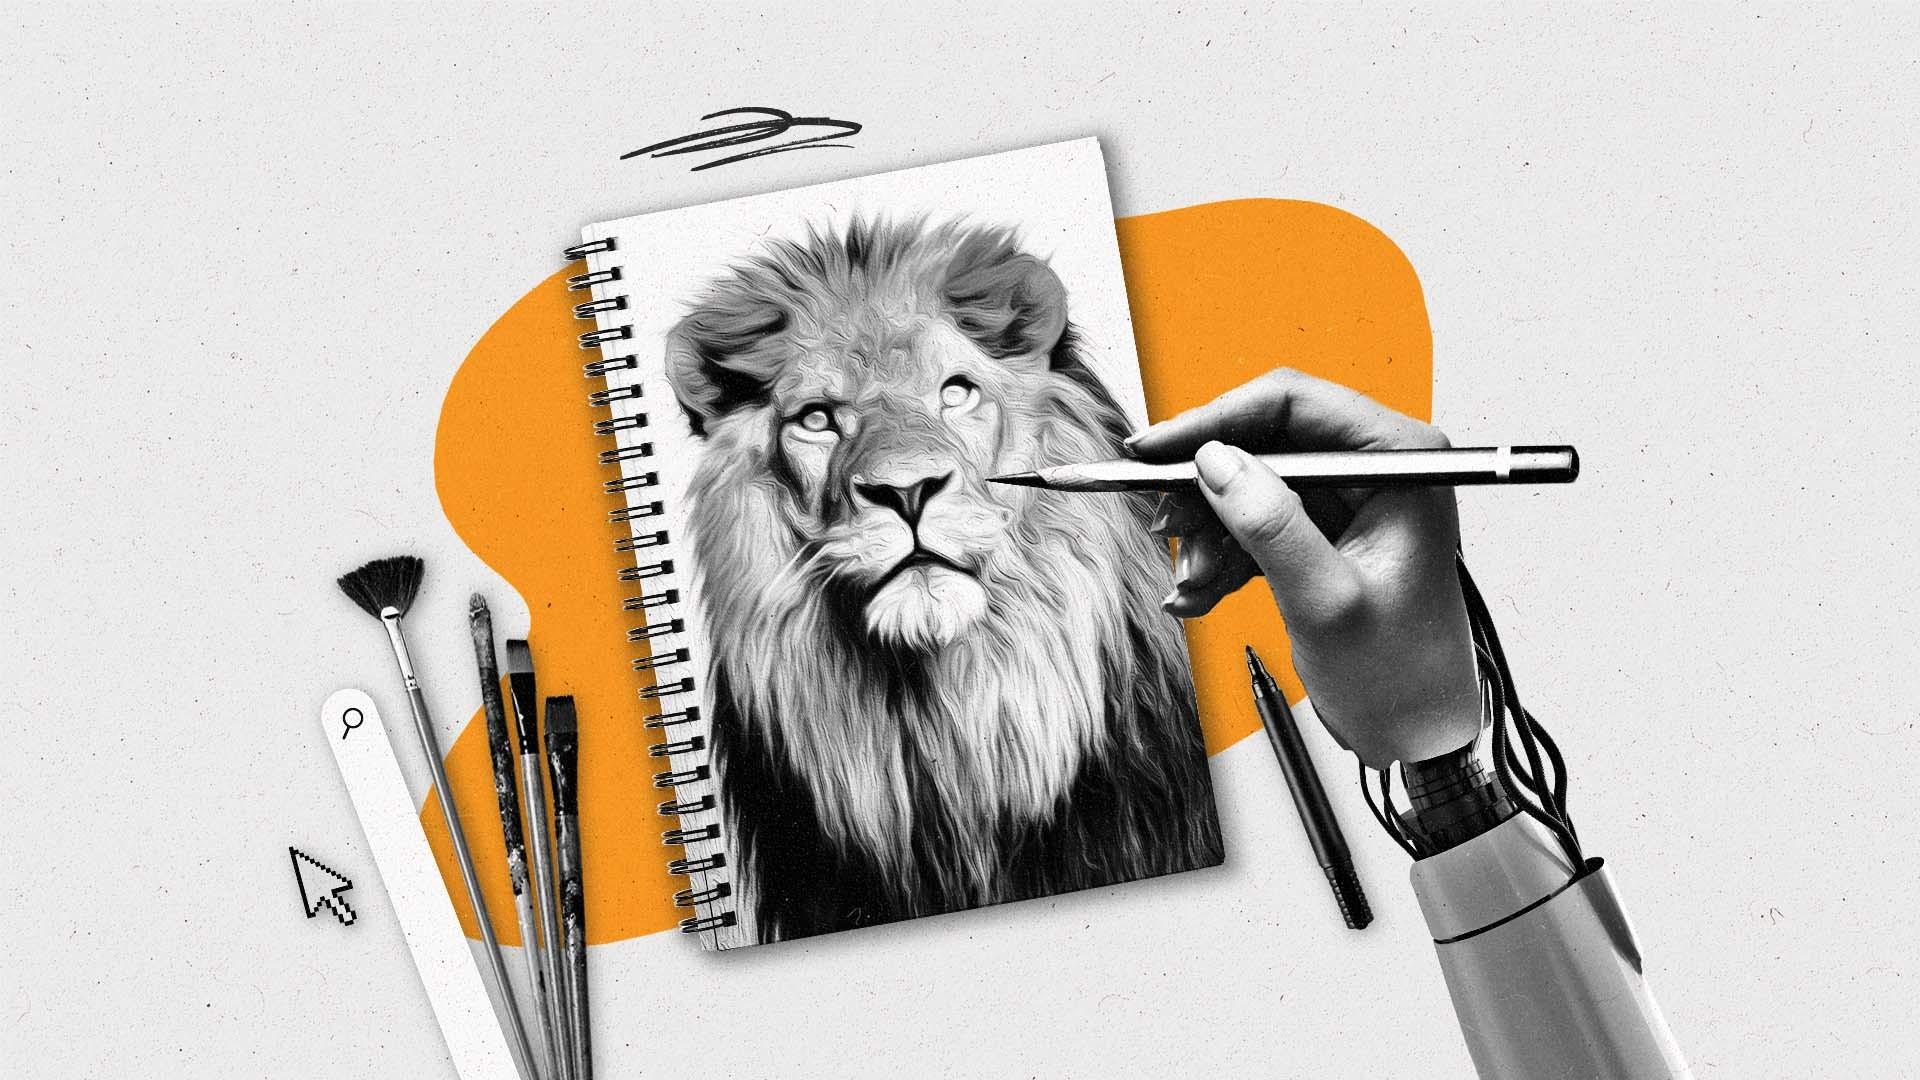 A robotic hand sketches a lion in a notepad alongside brushes, a search bar, and a cursor.